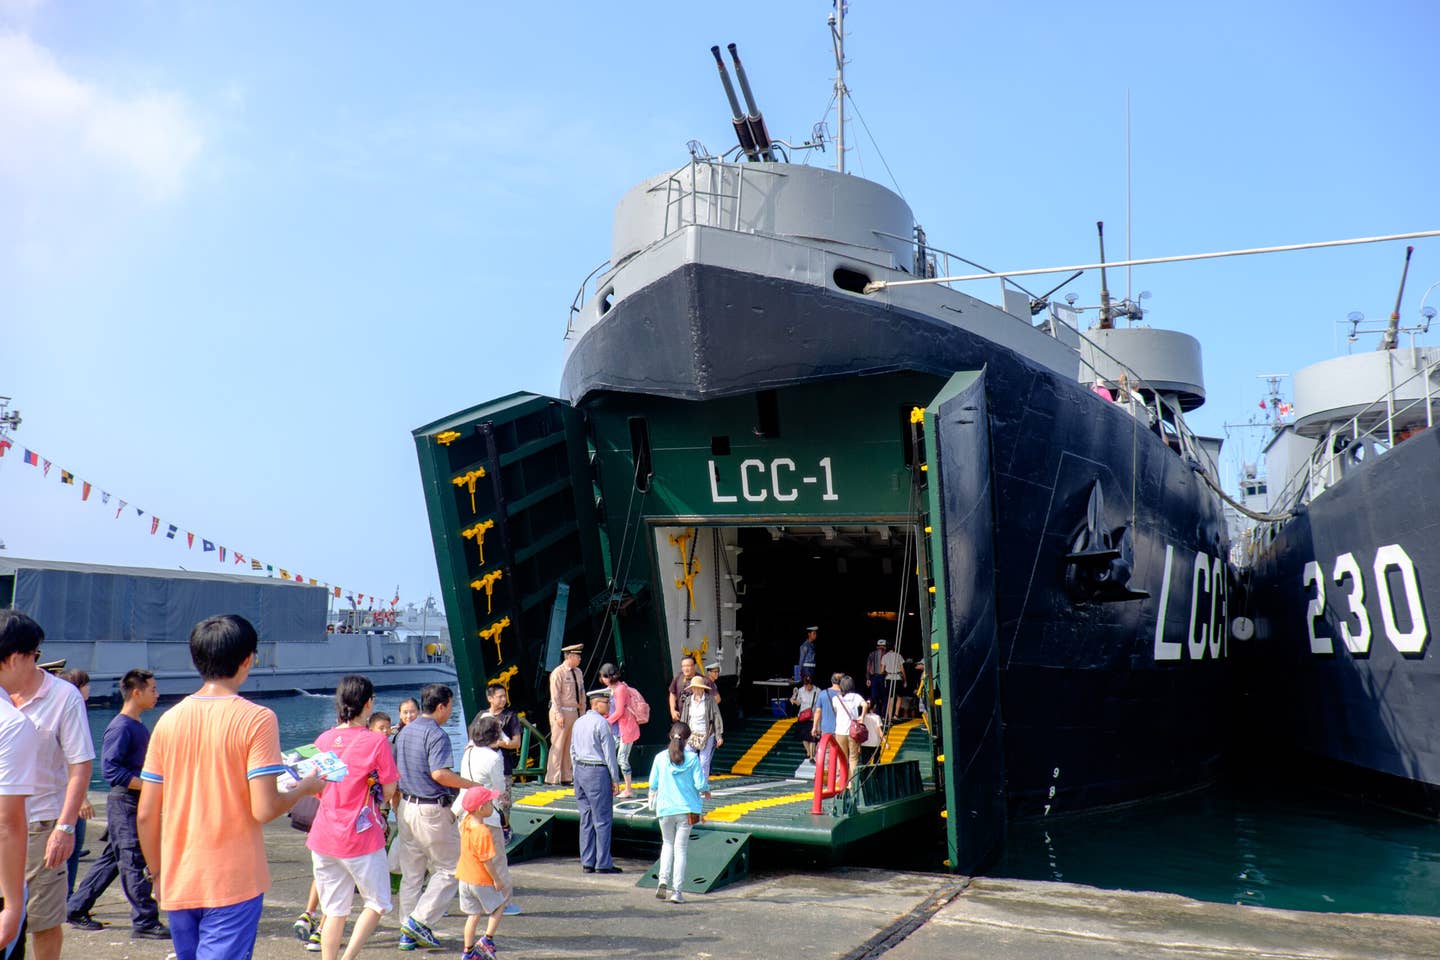 The amphibious command ship ROCS <em>Kao Hsiung</em> (LCC-1) represents the antiquated nature of the current ROCN amphibious warfare fleet. Originally launched in 1944 as a U.S. Navy tank landing ship, this vessel is still thought to be used by Taiwan for missile launch tests. <em>玄史生/Wikimedia Commons </em>